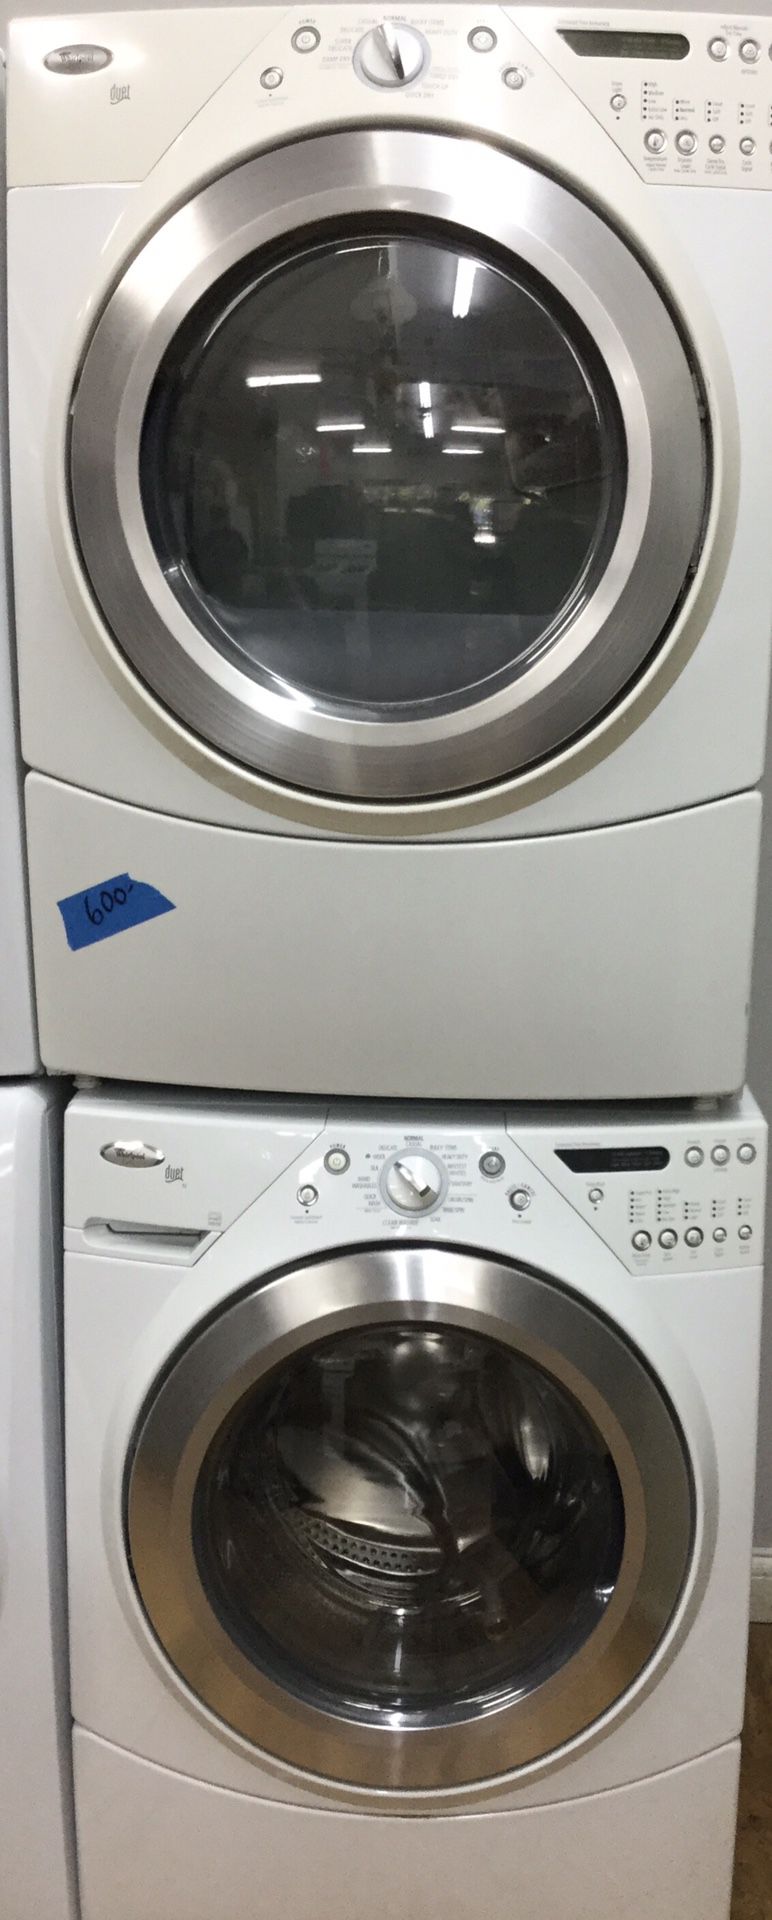 Whirlpool washer and a dryer